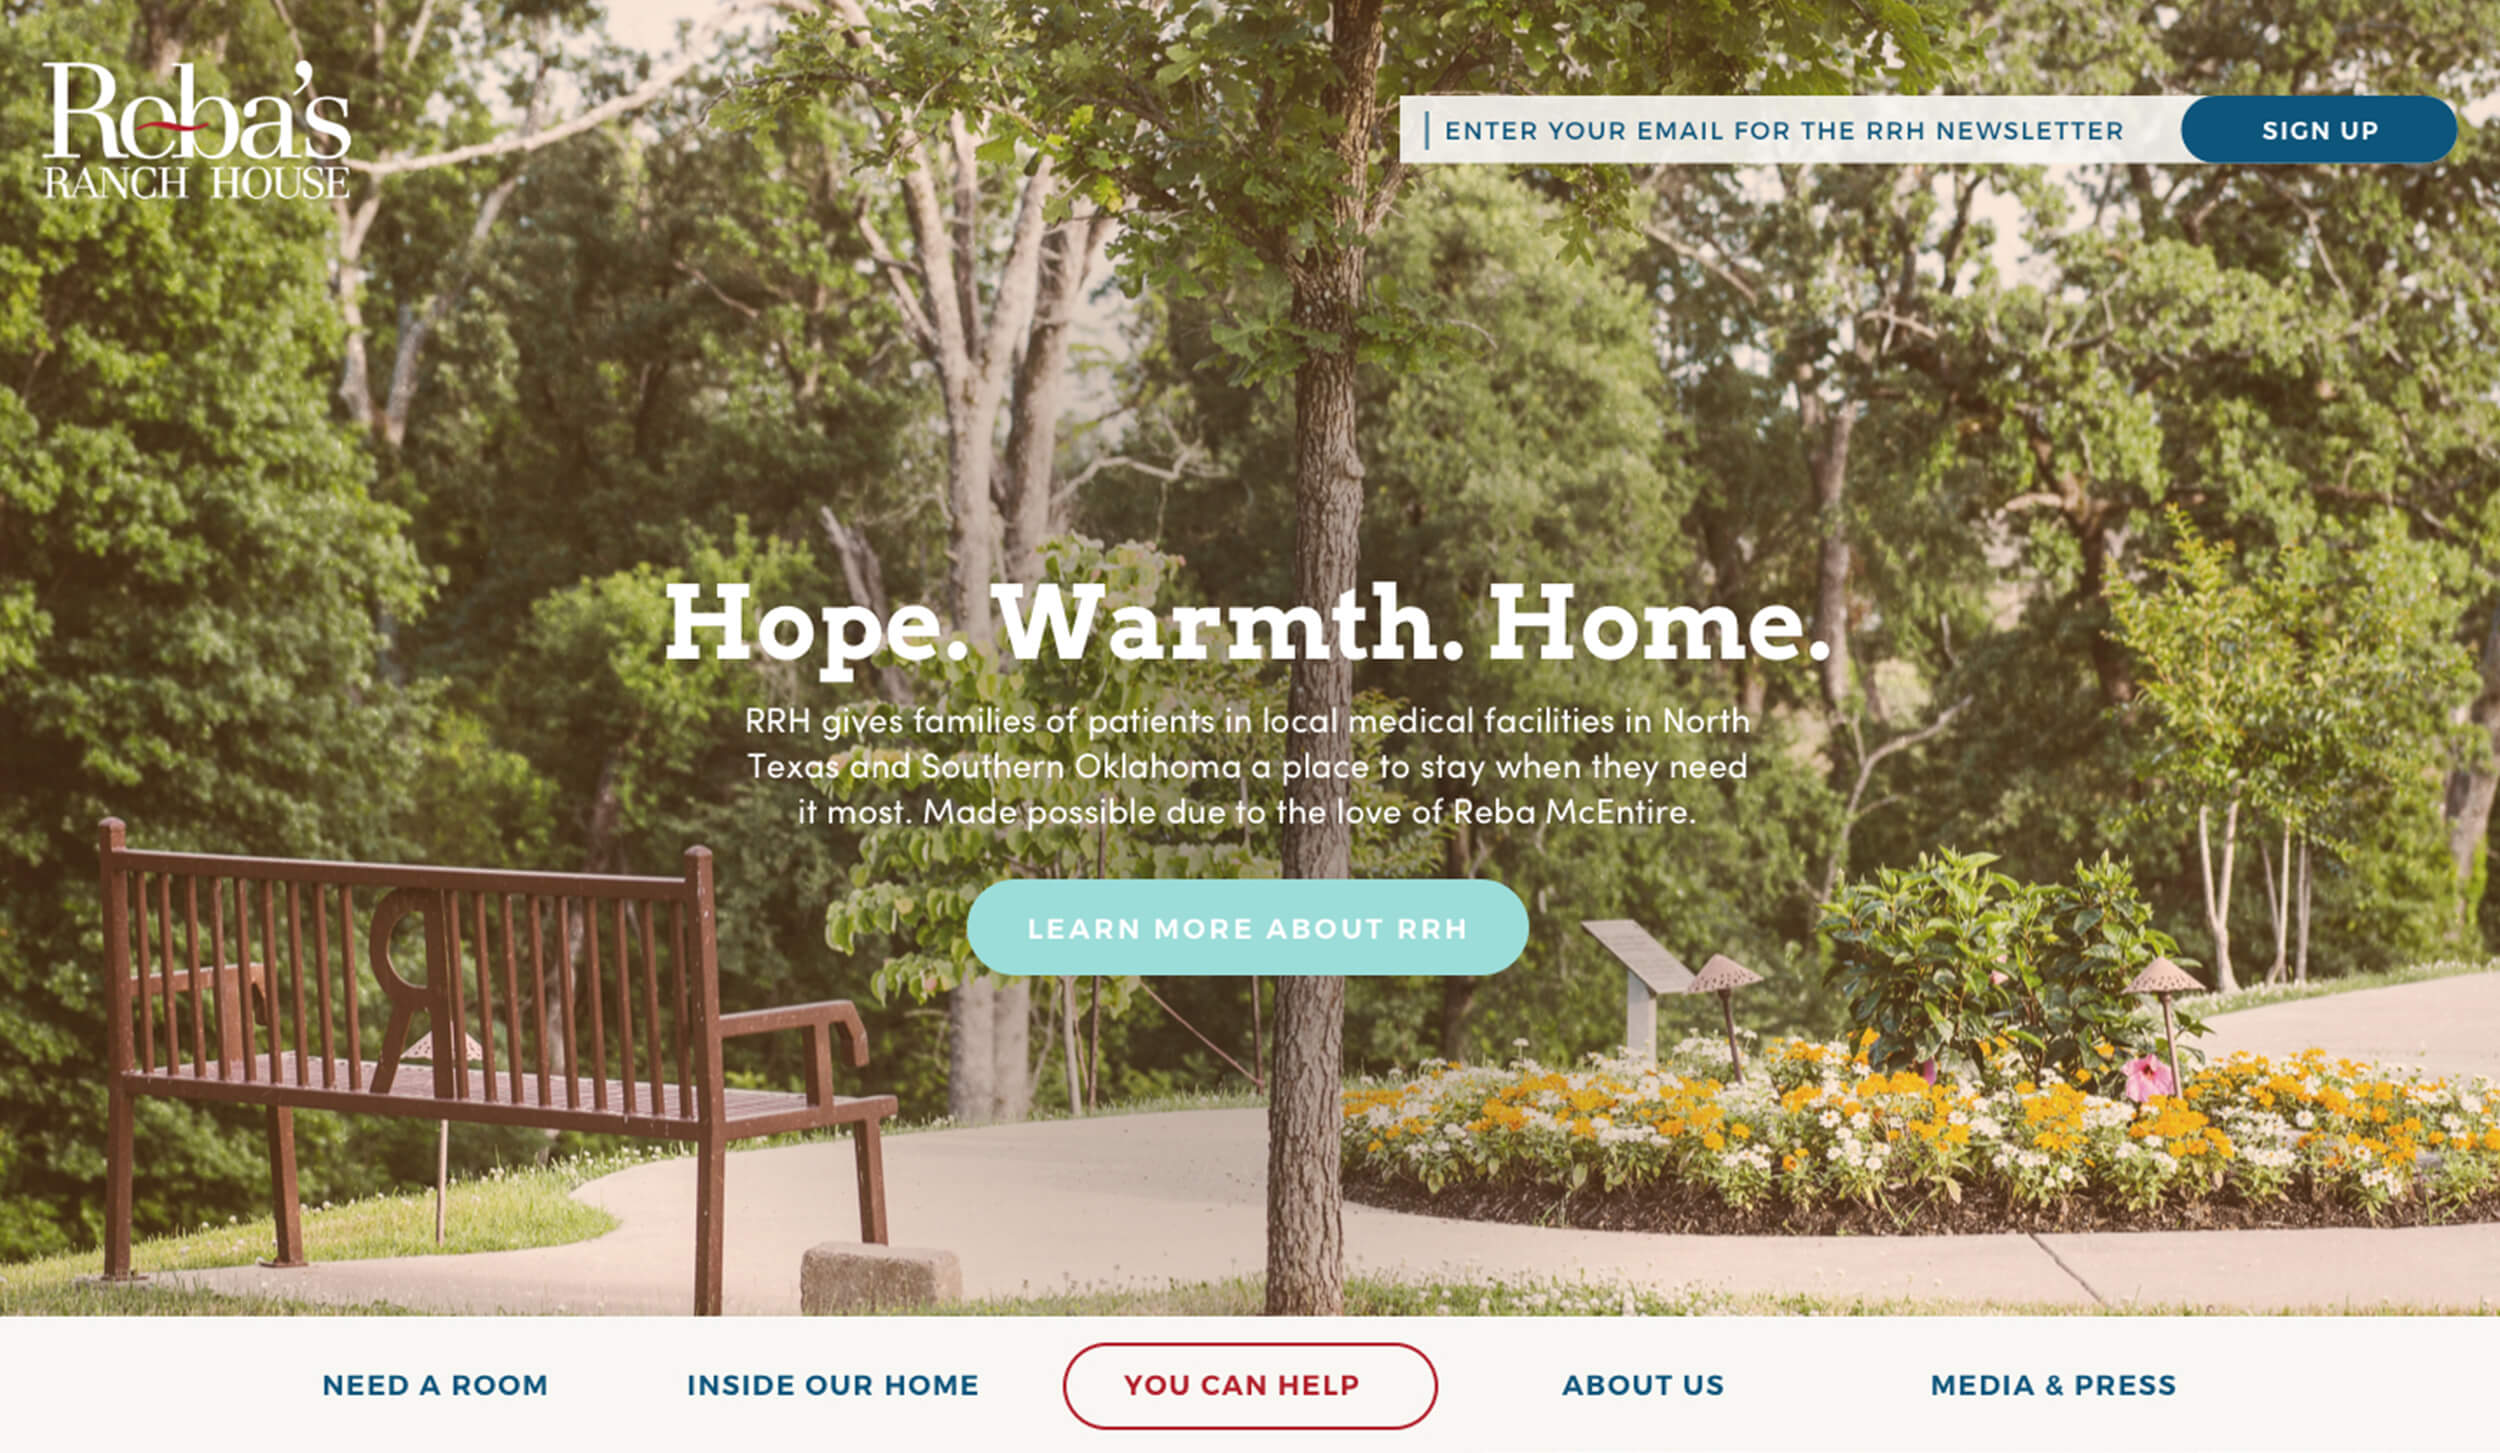 Homepage header website design for Rebas Ranch House, a charity organization in Denison, Texas